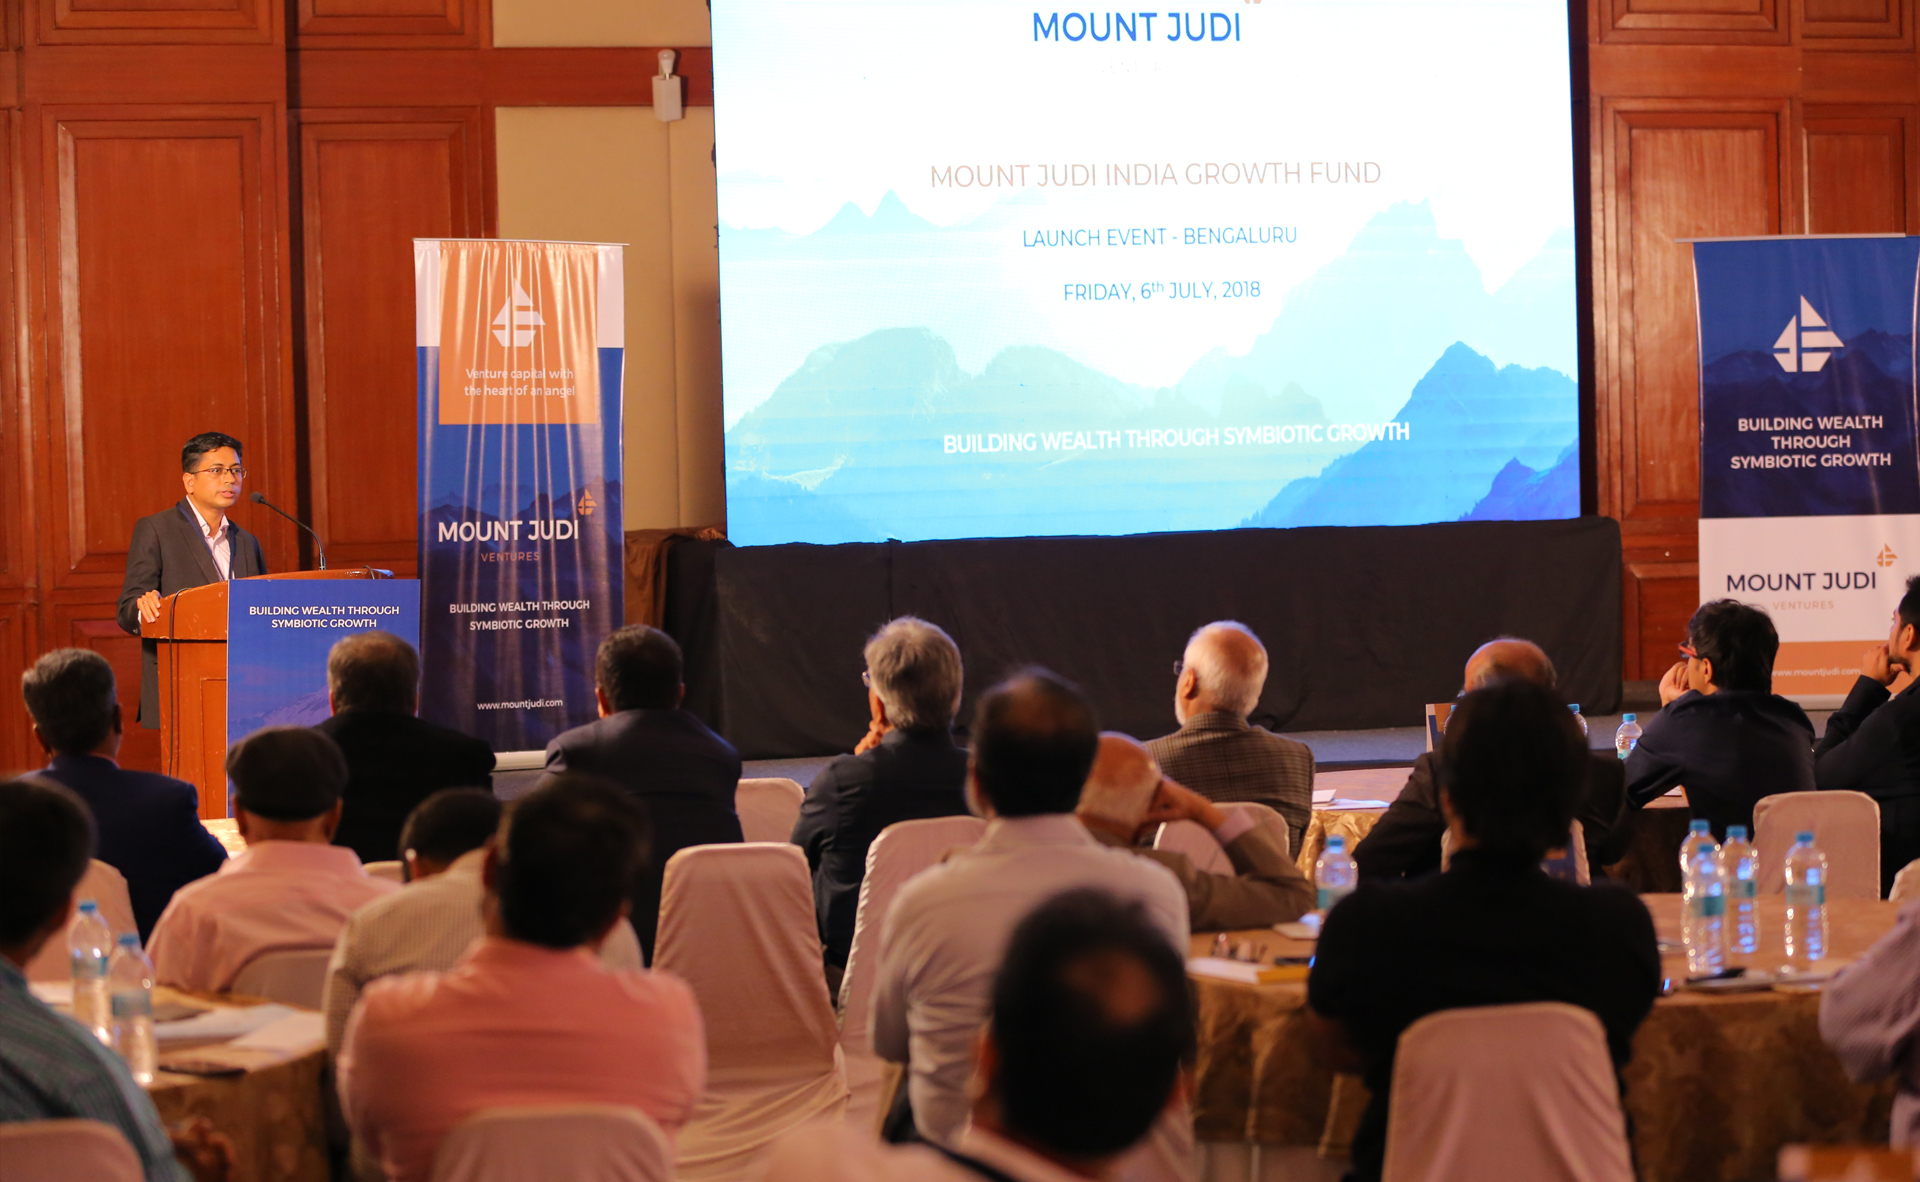 Mr. Kazi Arif Zaman speaking on Venture Capital - an opportune investment for wealth generation and business growth